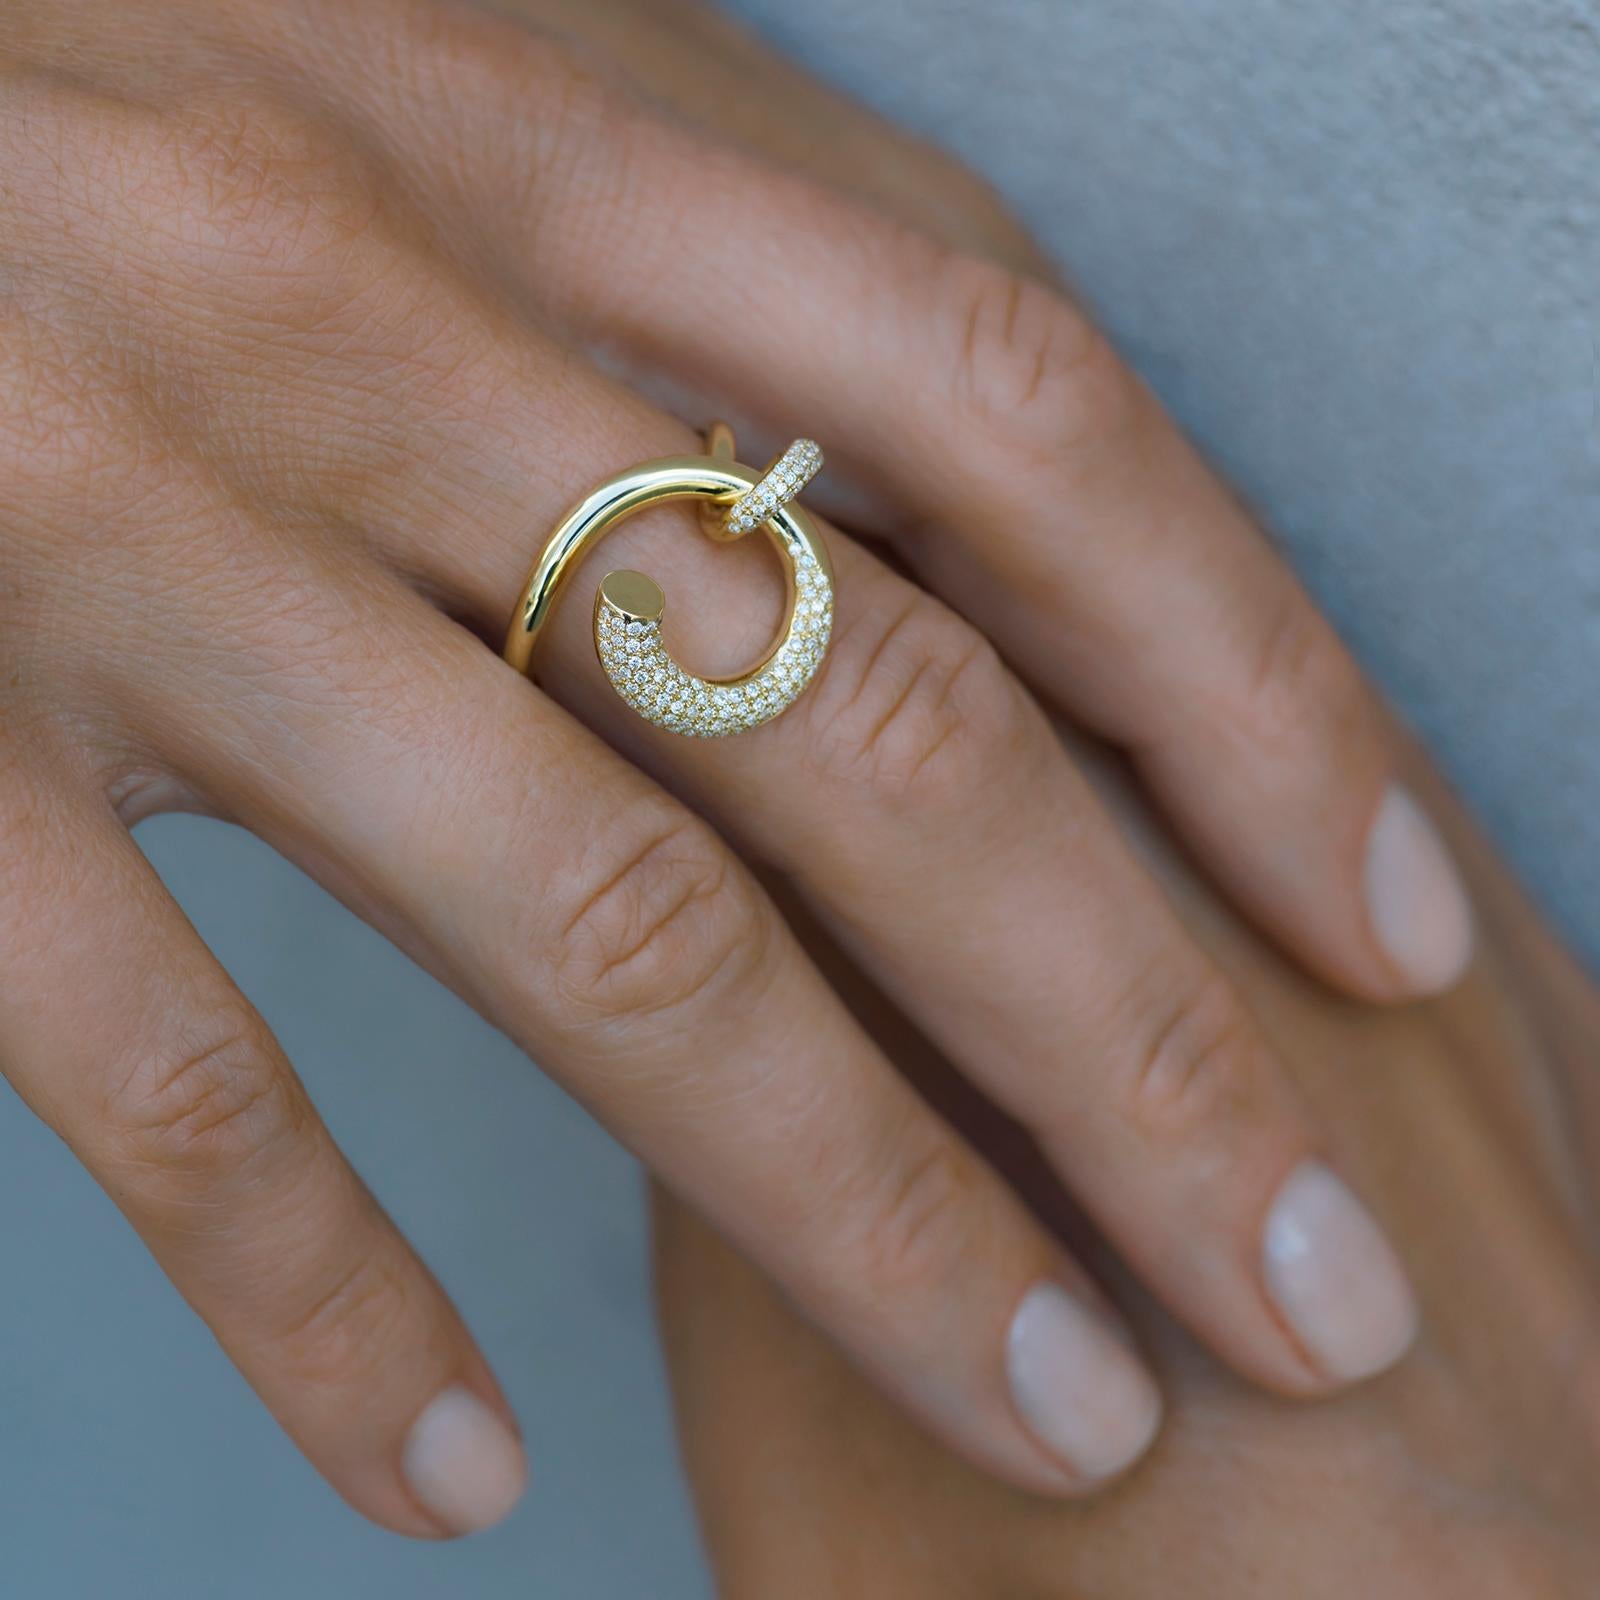 Kloto’s Radiant ring is crafted from 18k yellow and diamonds. The  design features two intertwining curved lines, set with sparkling white diamonds. Sculptural, sensual, sophisticated.

Kloto's designer Senem Gençoğlu, combines her 40-year family